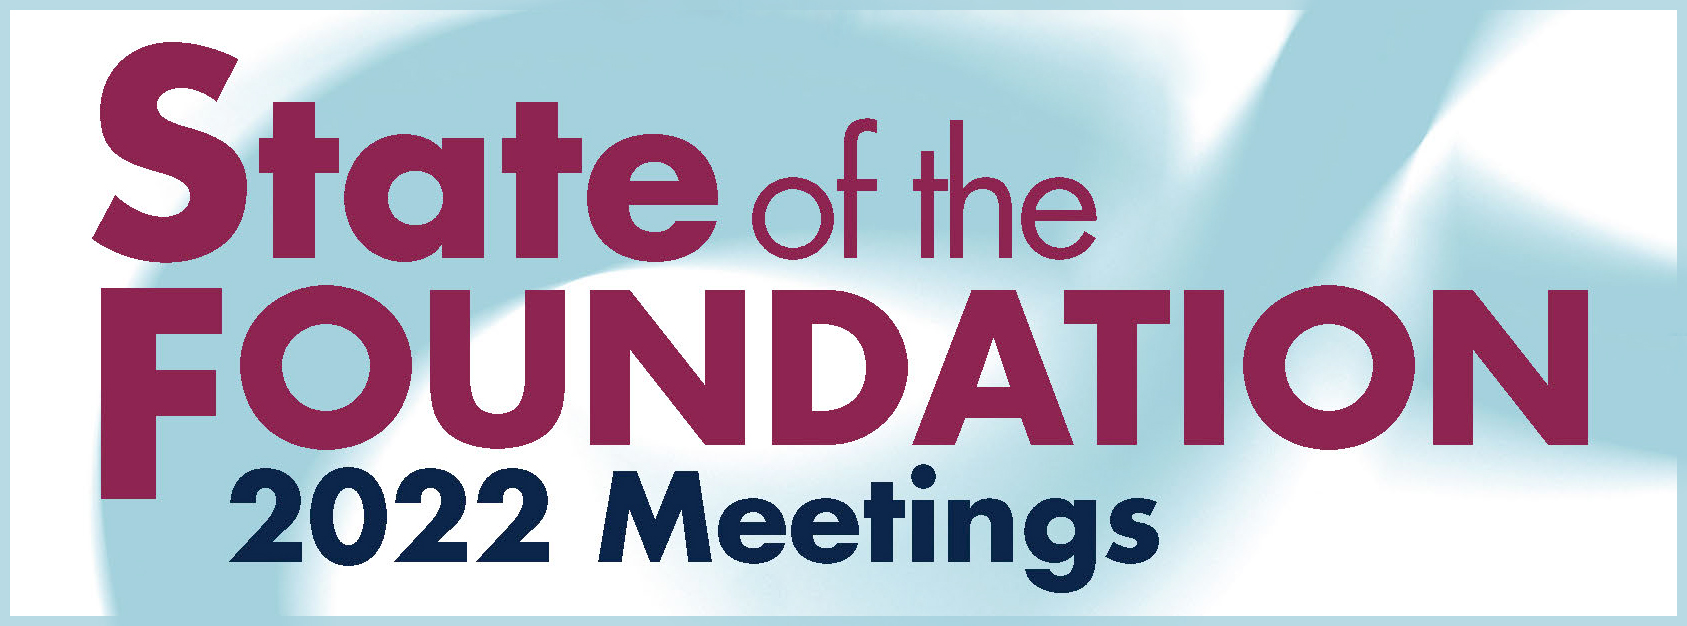 Join Us for the 2022 State of the Foundation Meetings